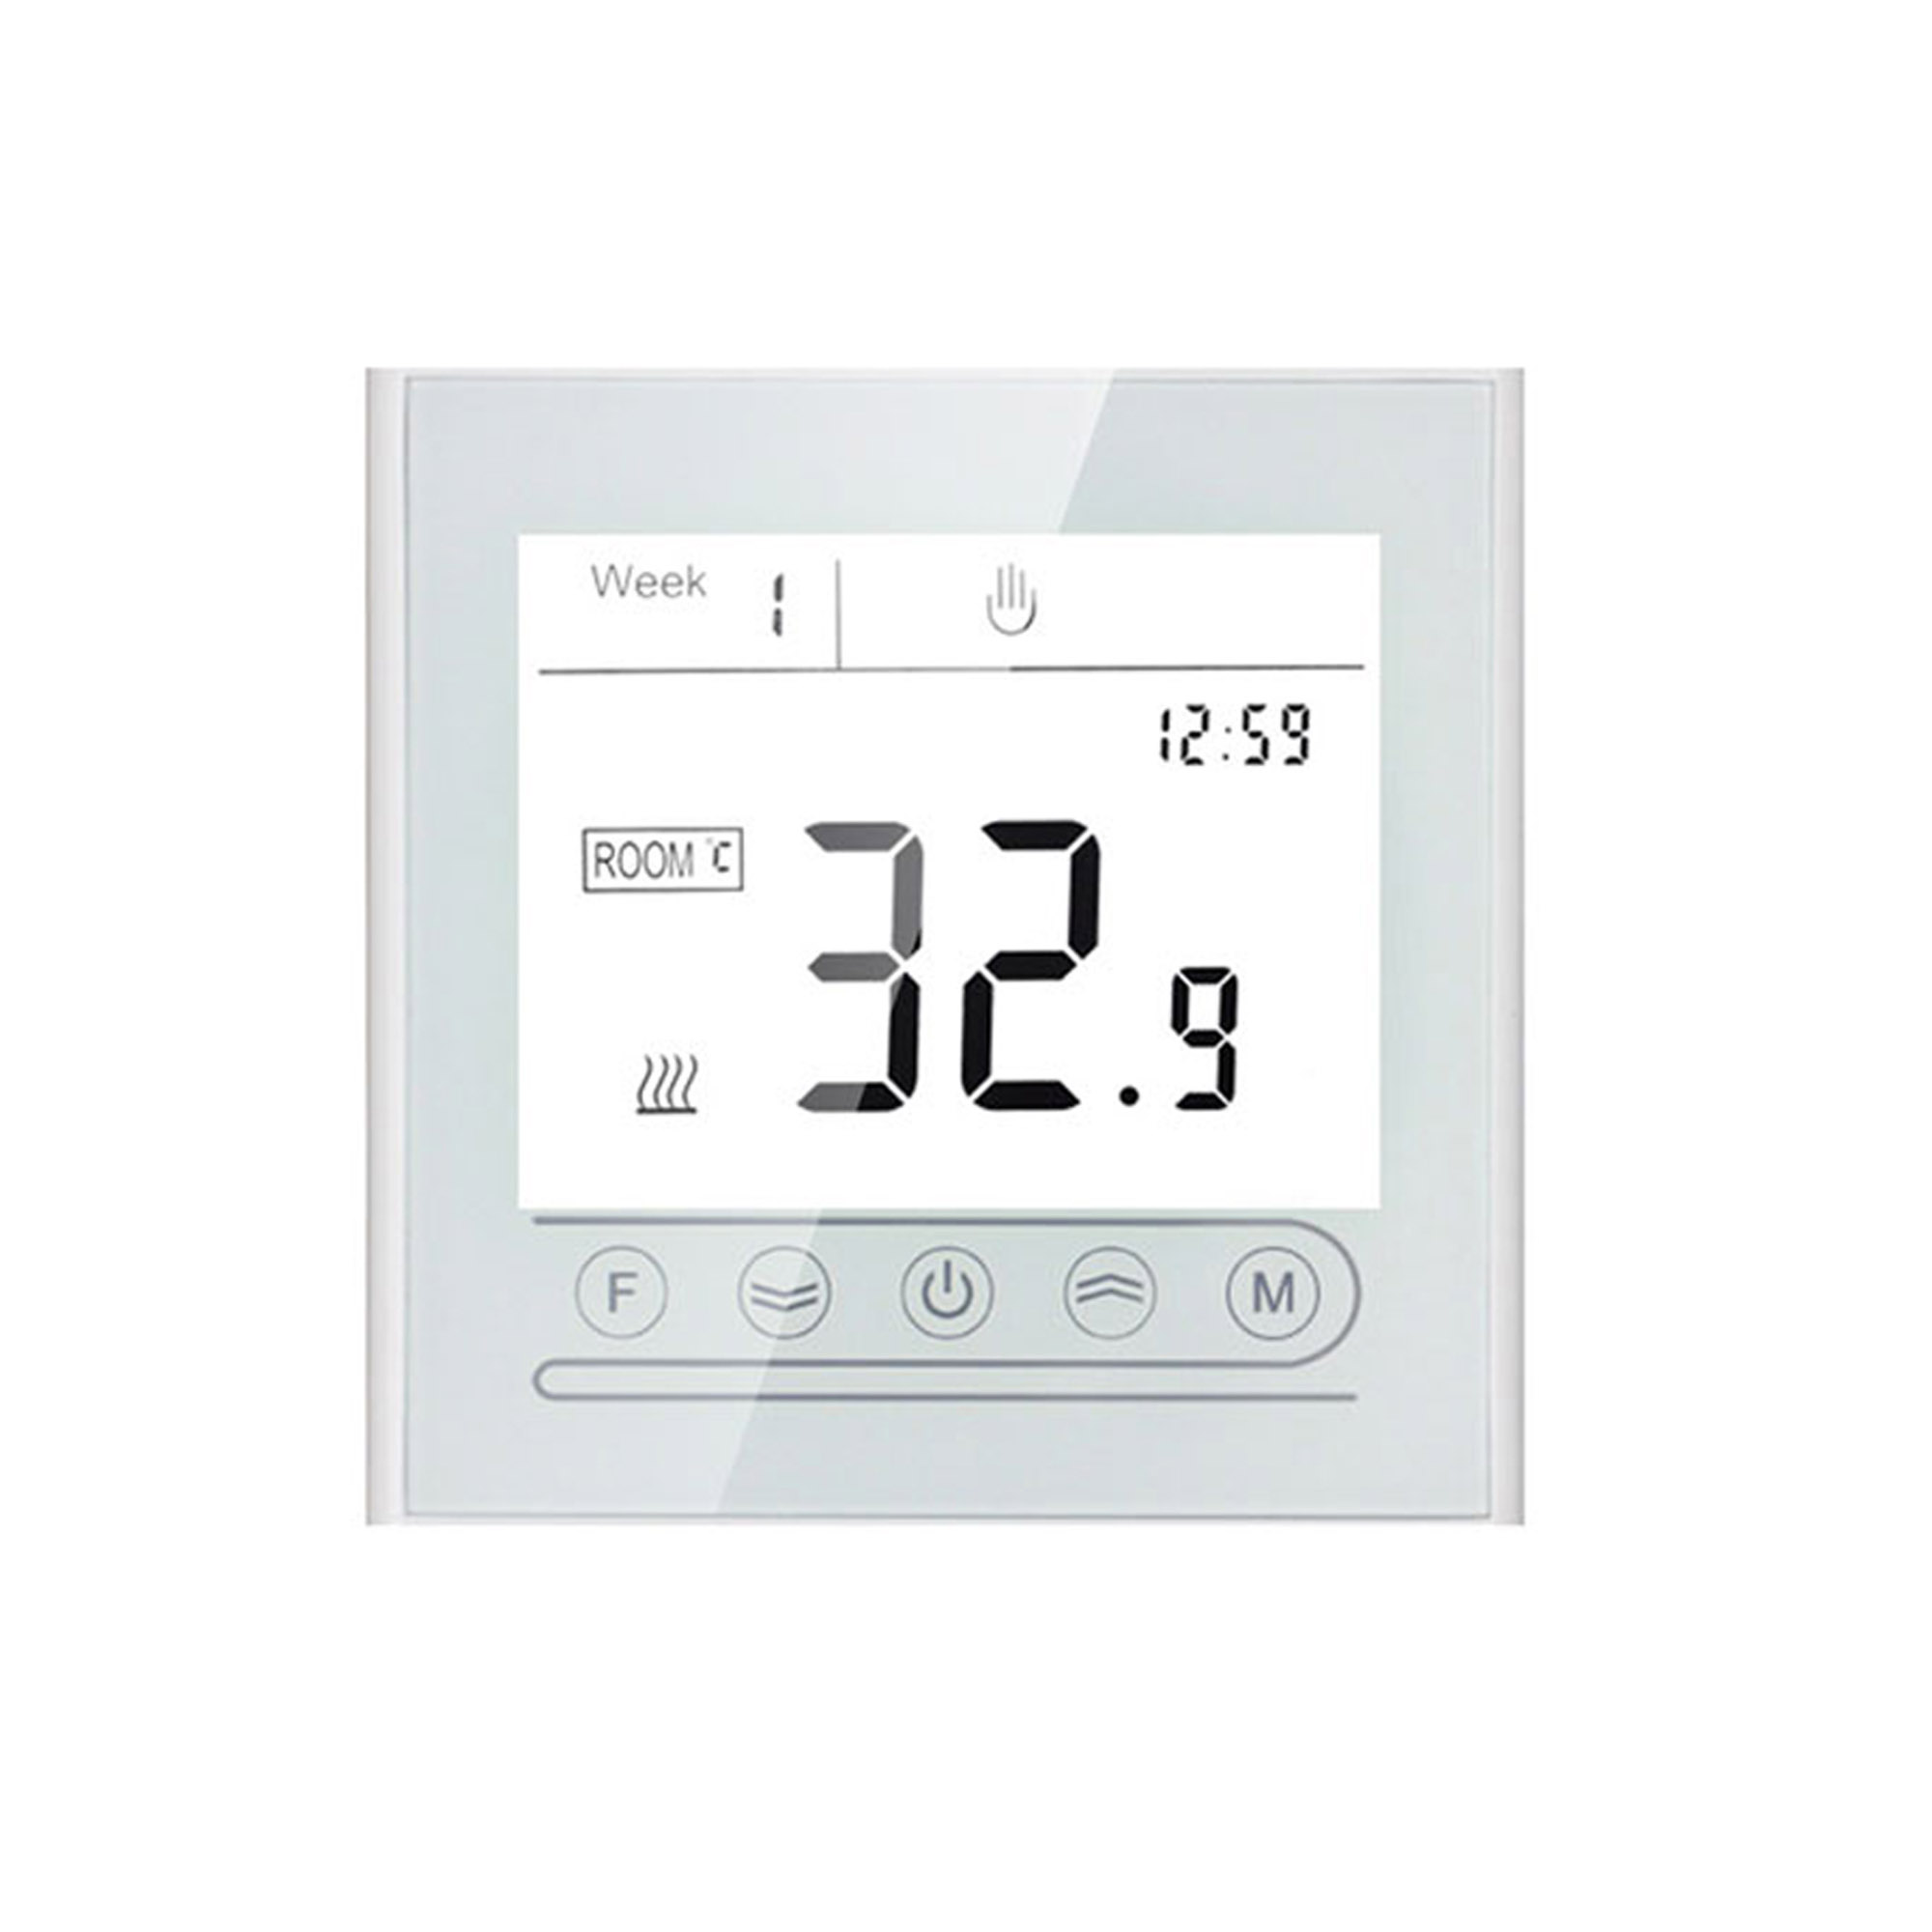 Tuya WiFi Smart Thermostat, Electric Floor Heating Water/Gas Boiler Temperature Remote Controller